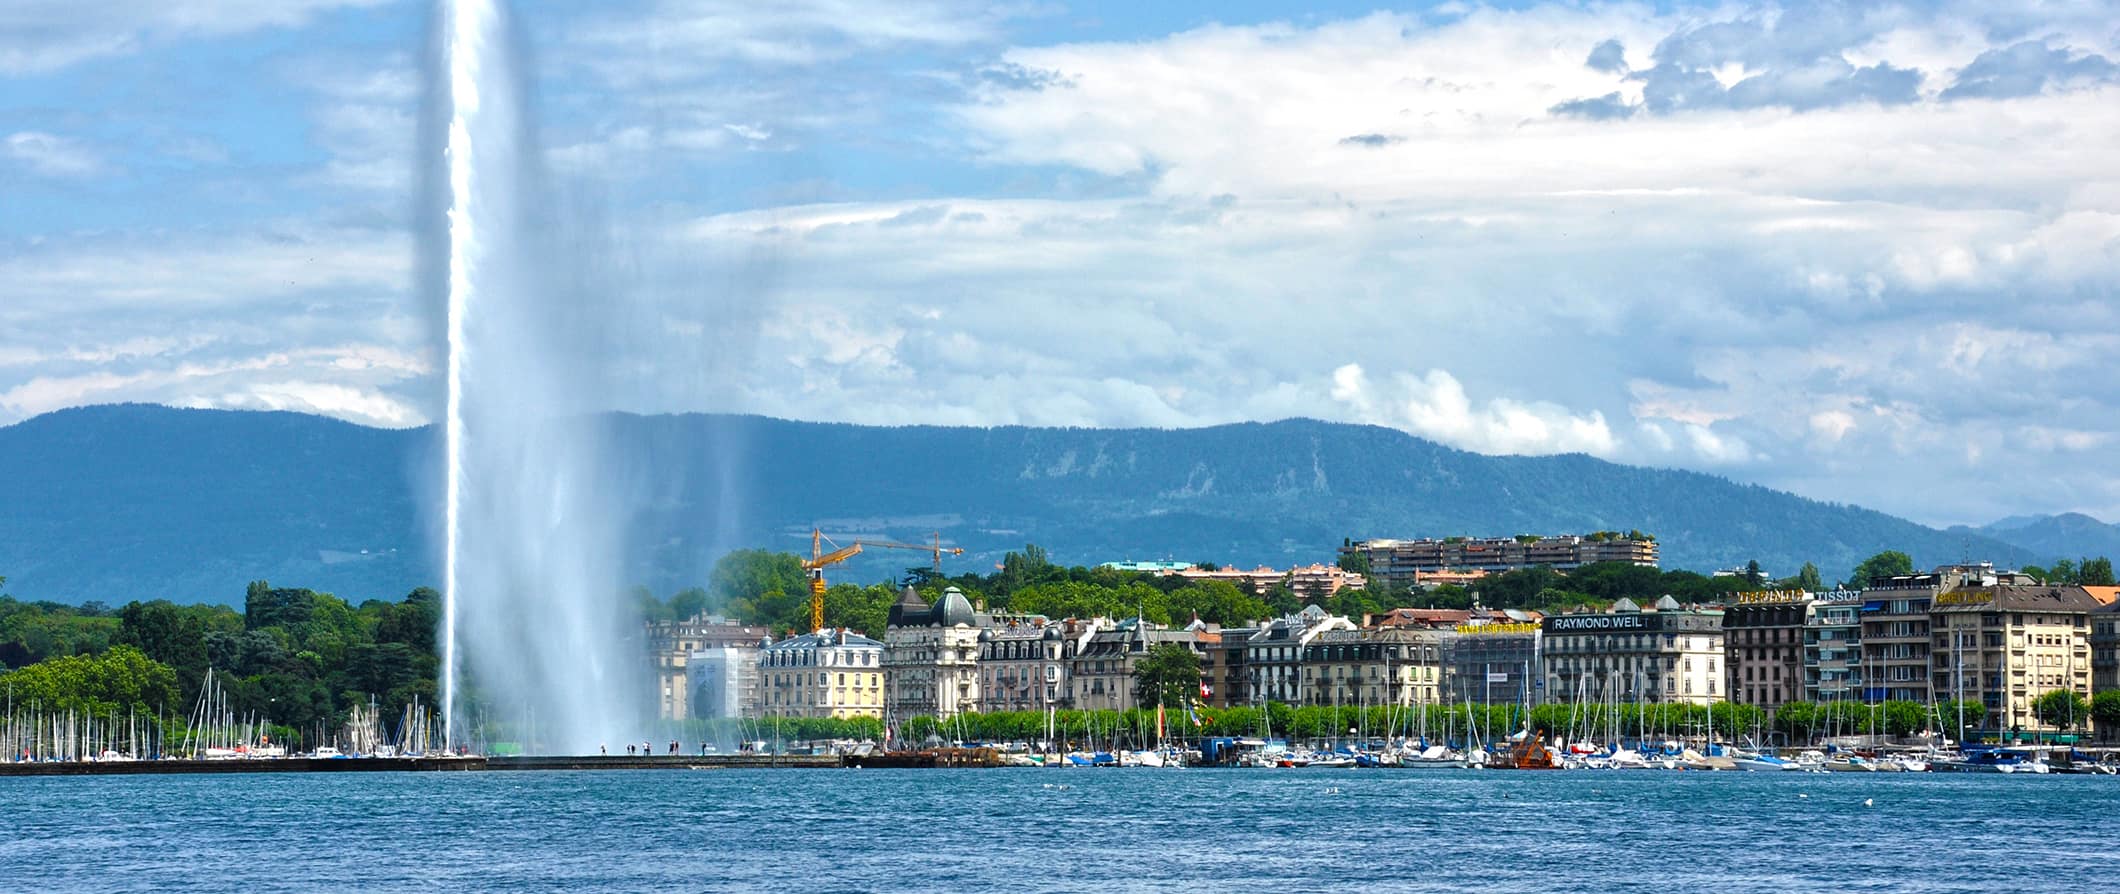 View of the jet fountain and the waterfront in Geneva, Switzerland on a bright and sunny summer day with mountains in the distance